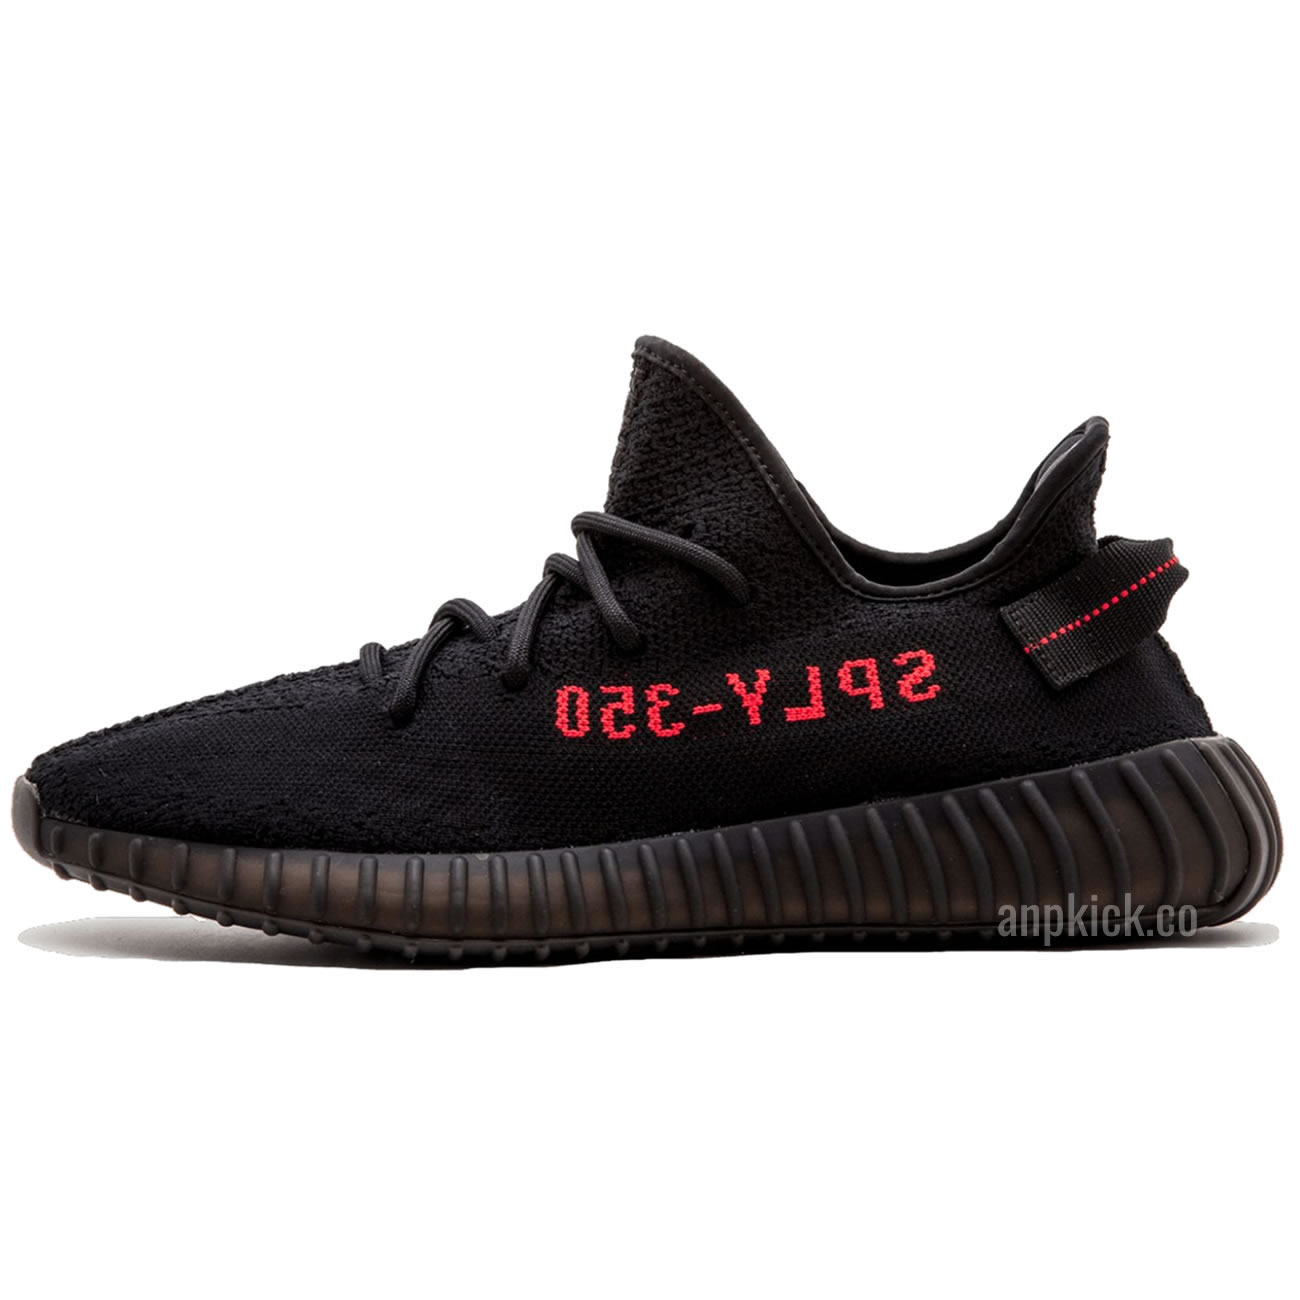 Yeezy Boost 350 V2 Bred Black Red 2020 New Release Cp9652 (1) - newkick.org